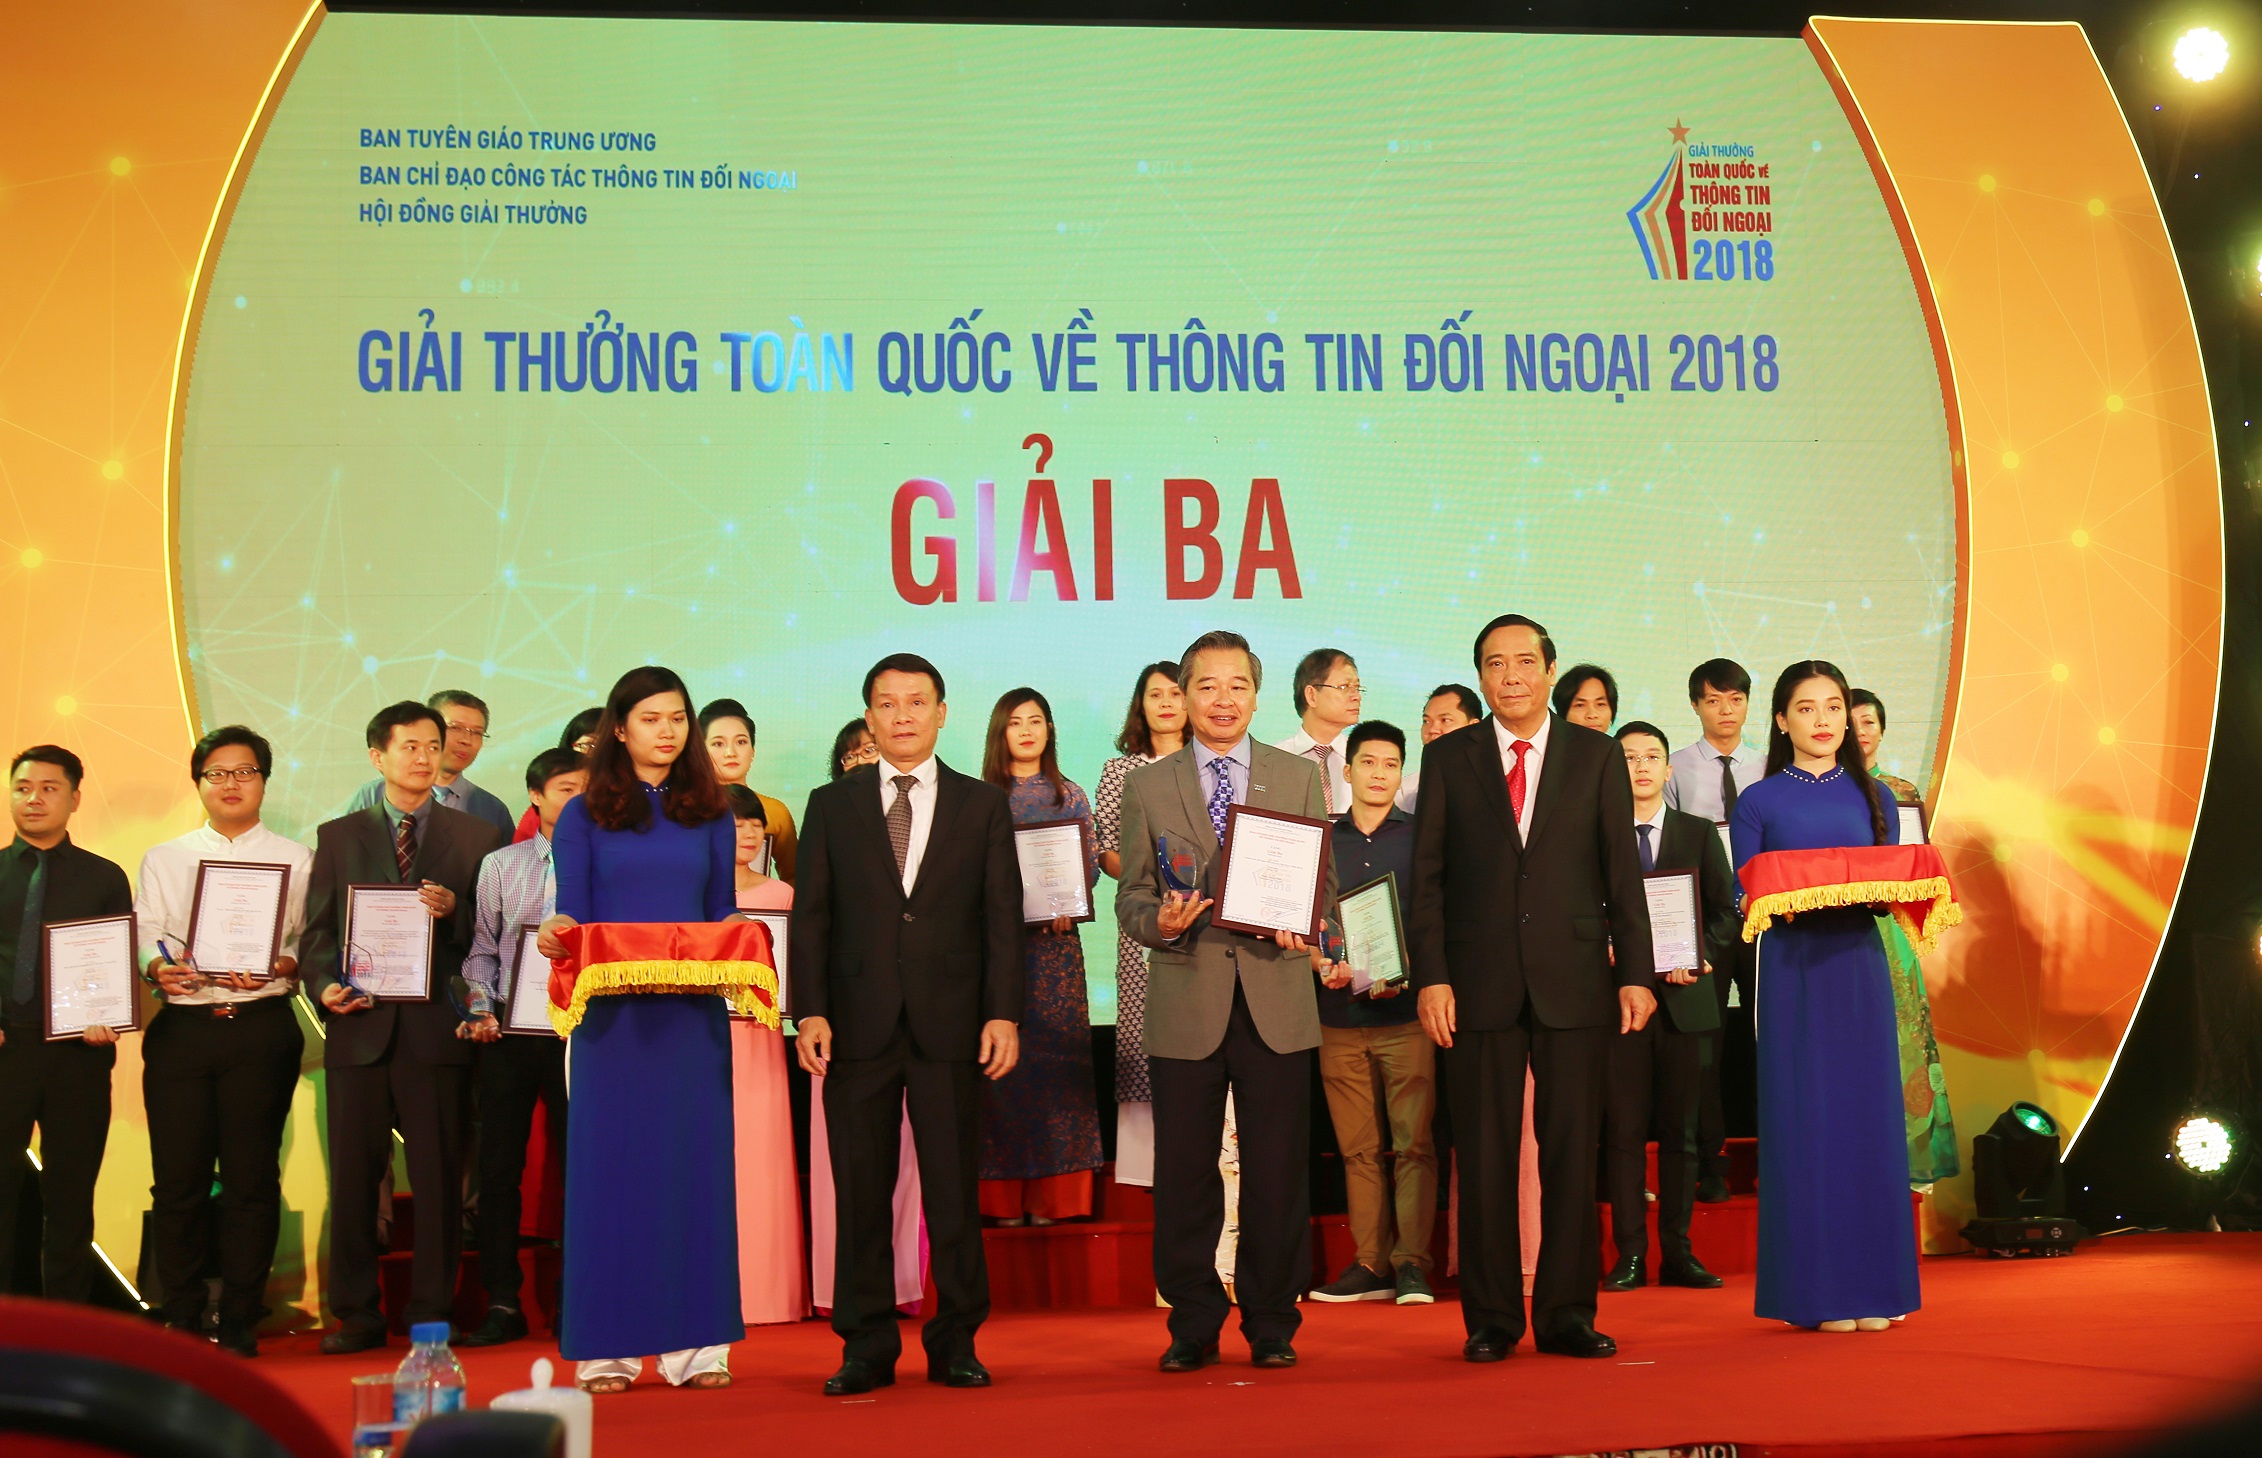 Prof.Dr Pham Quang Minh receives the 2018 National Award for external communication